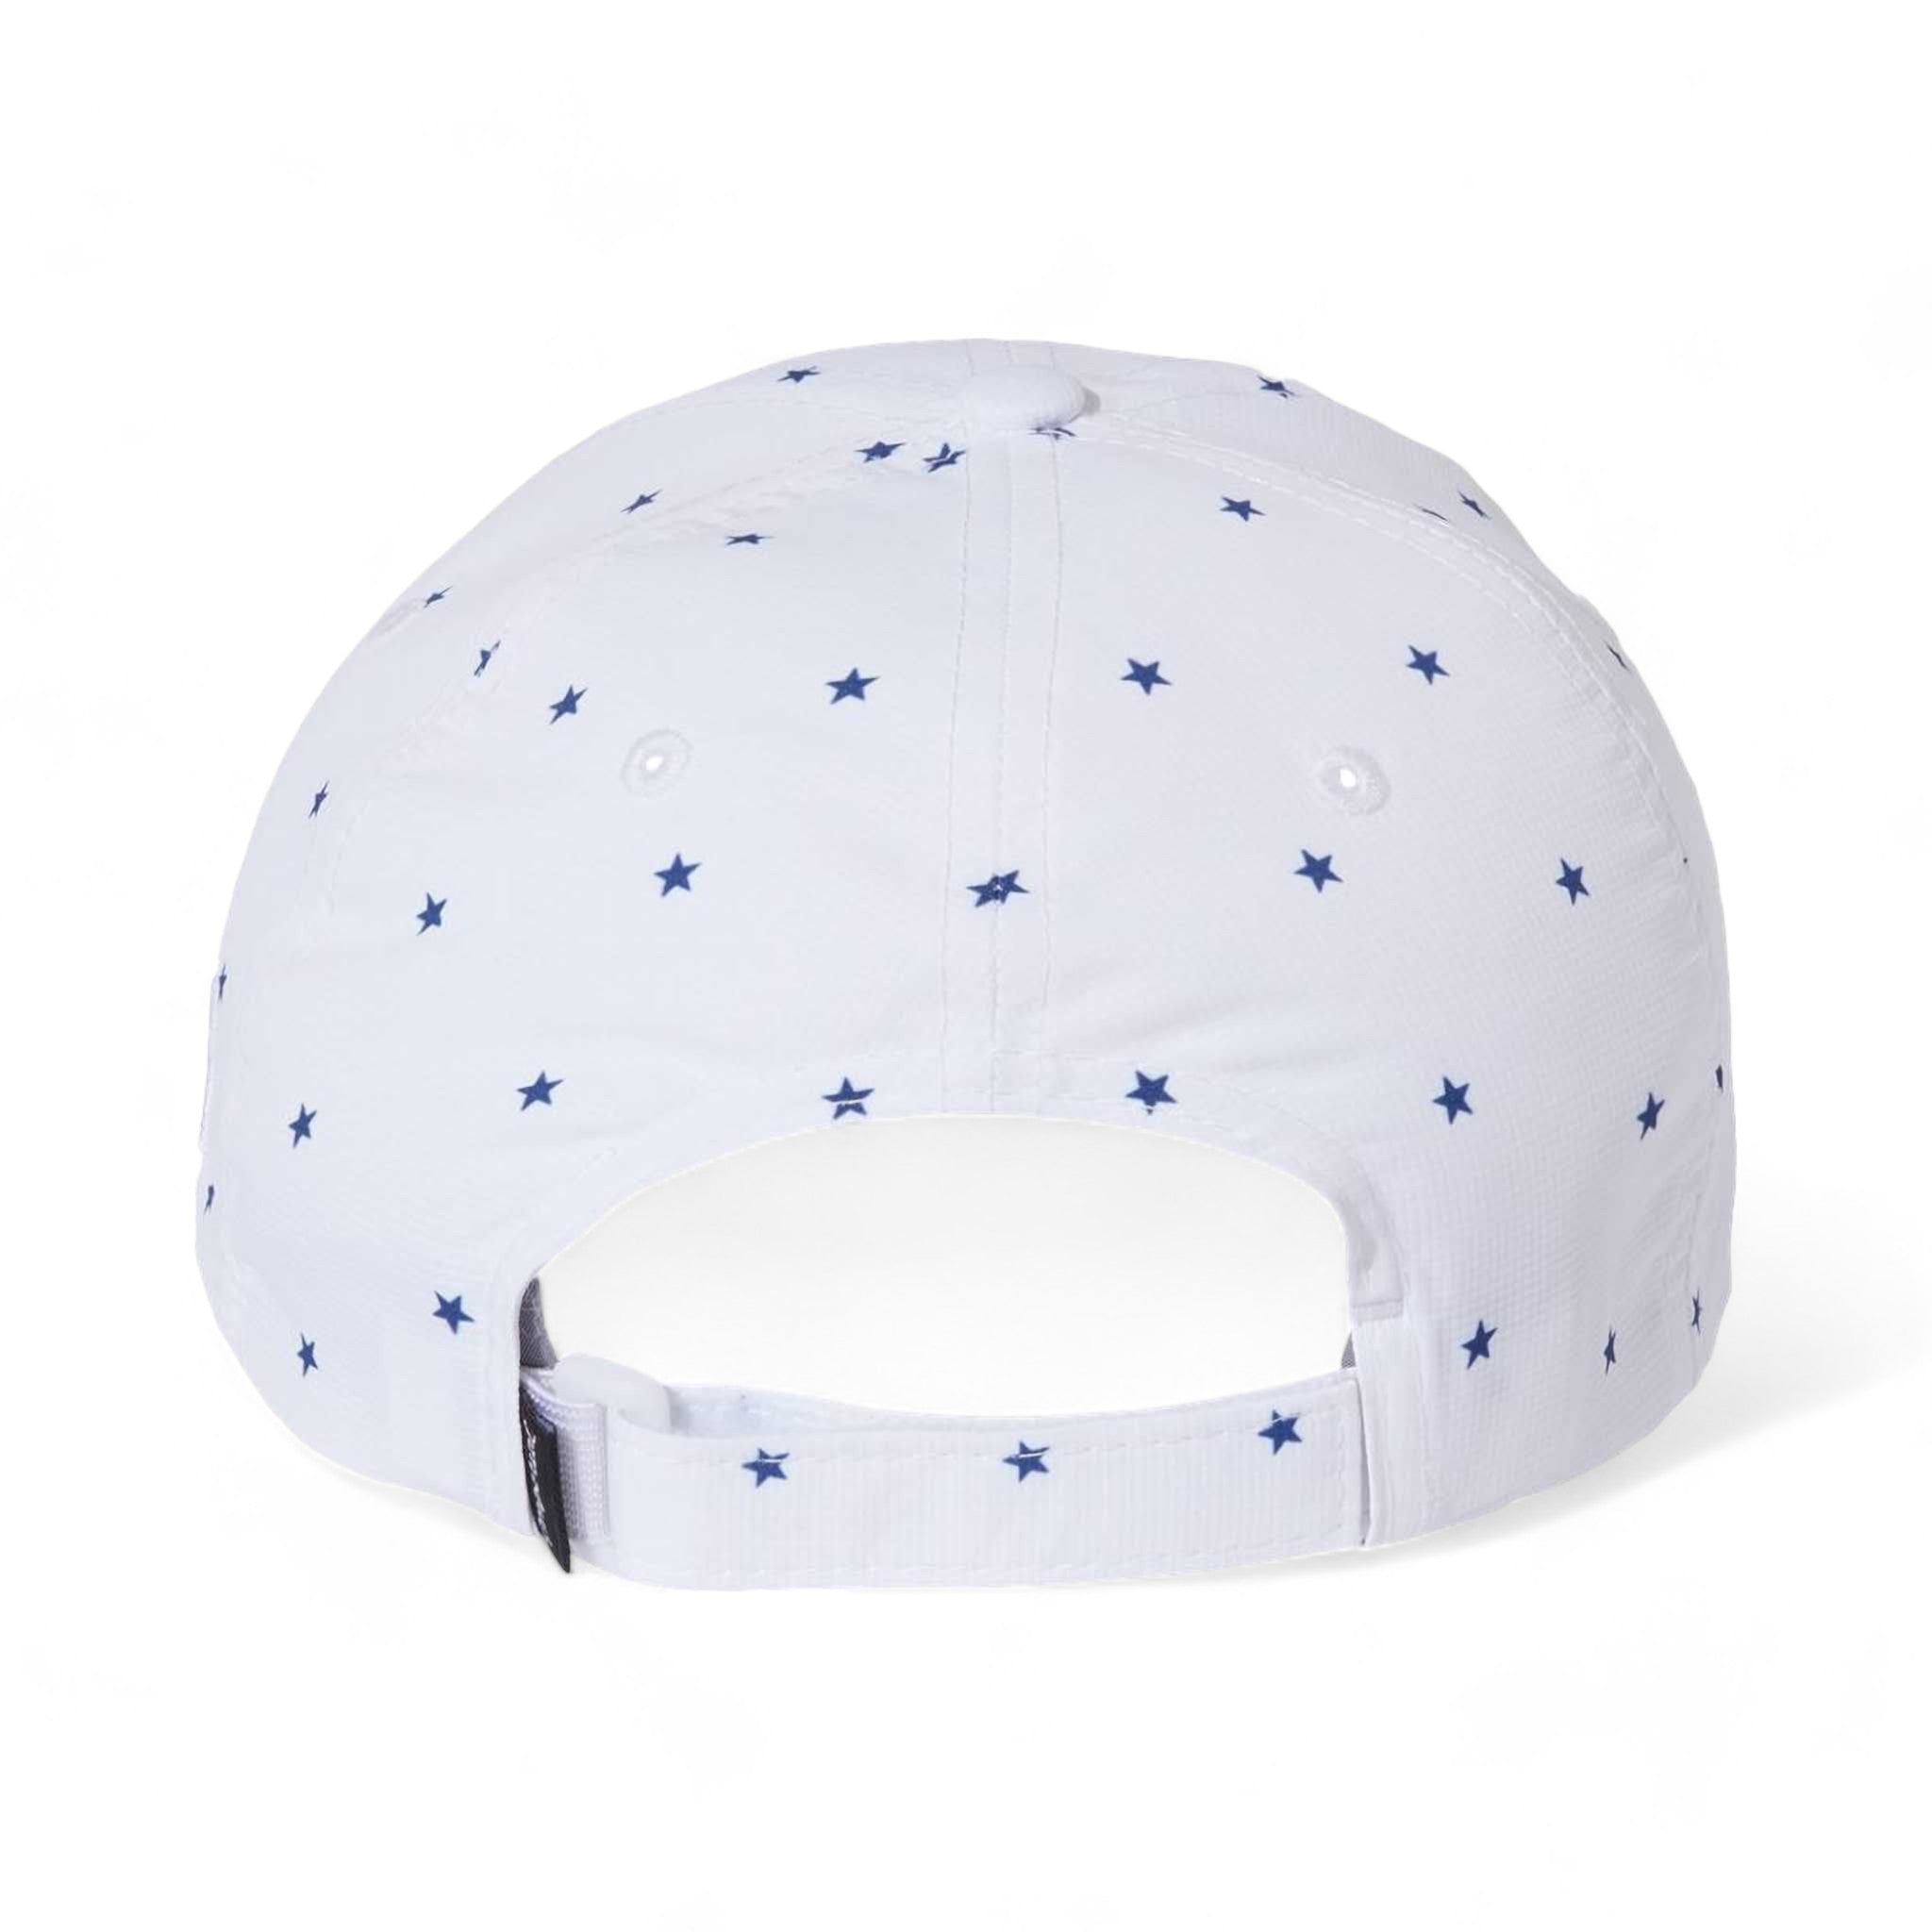 Back view of Imperial X210R custom hat in white stars